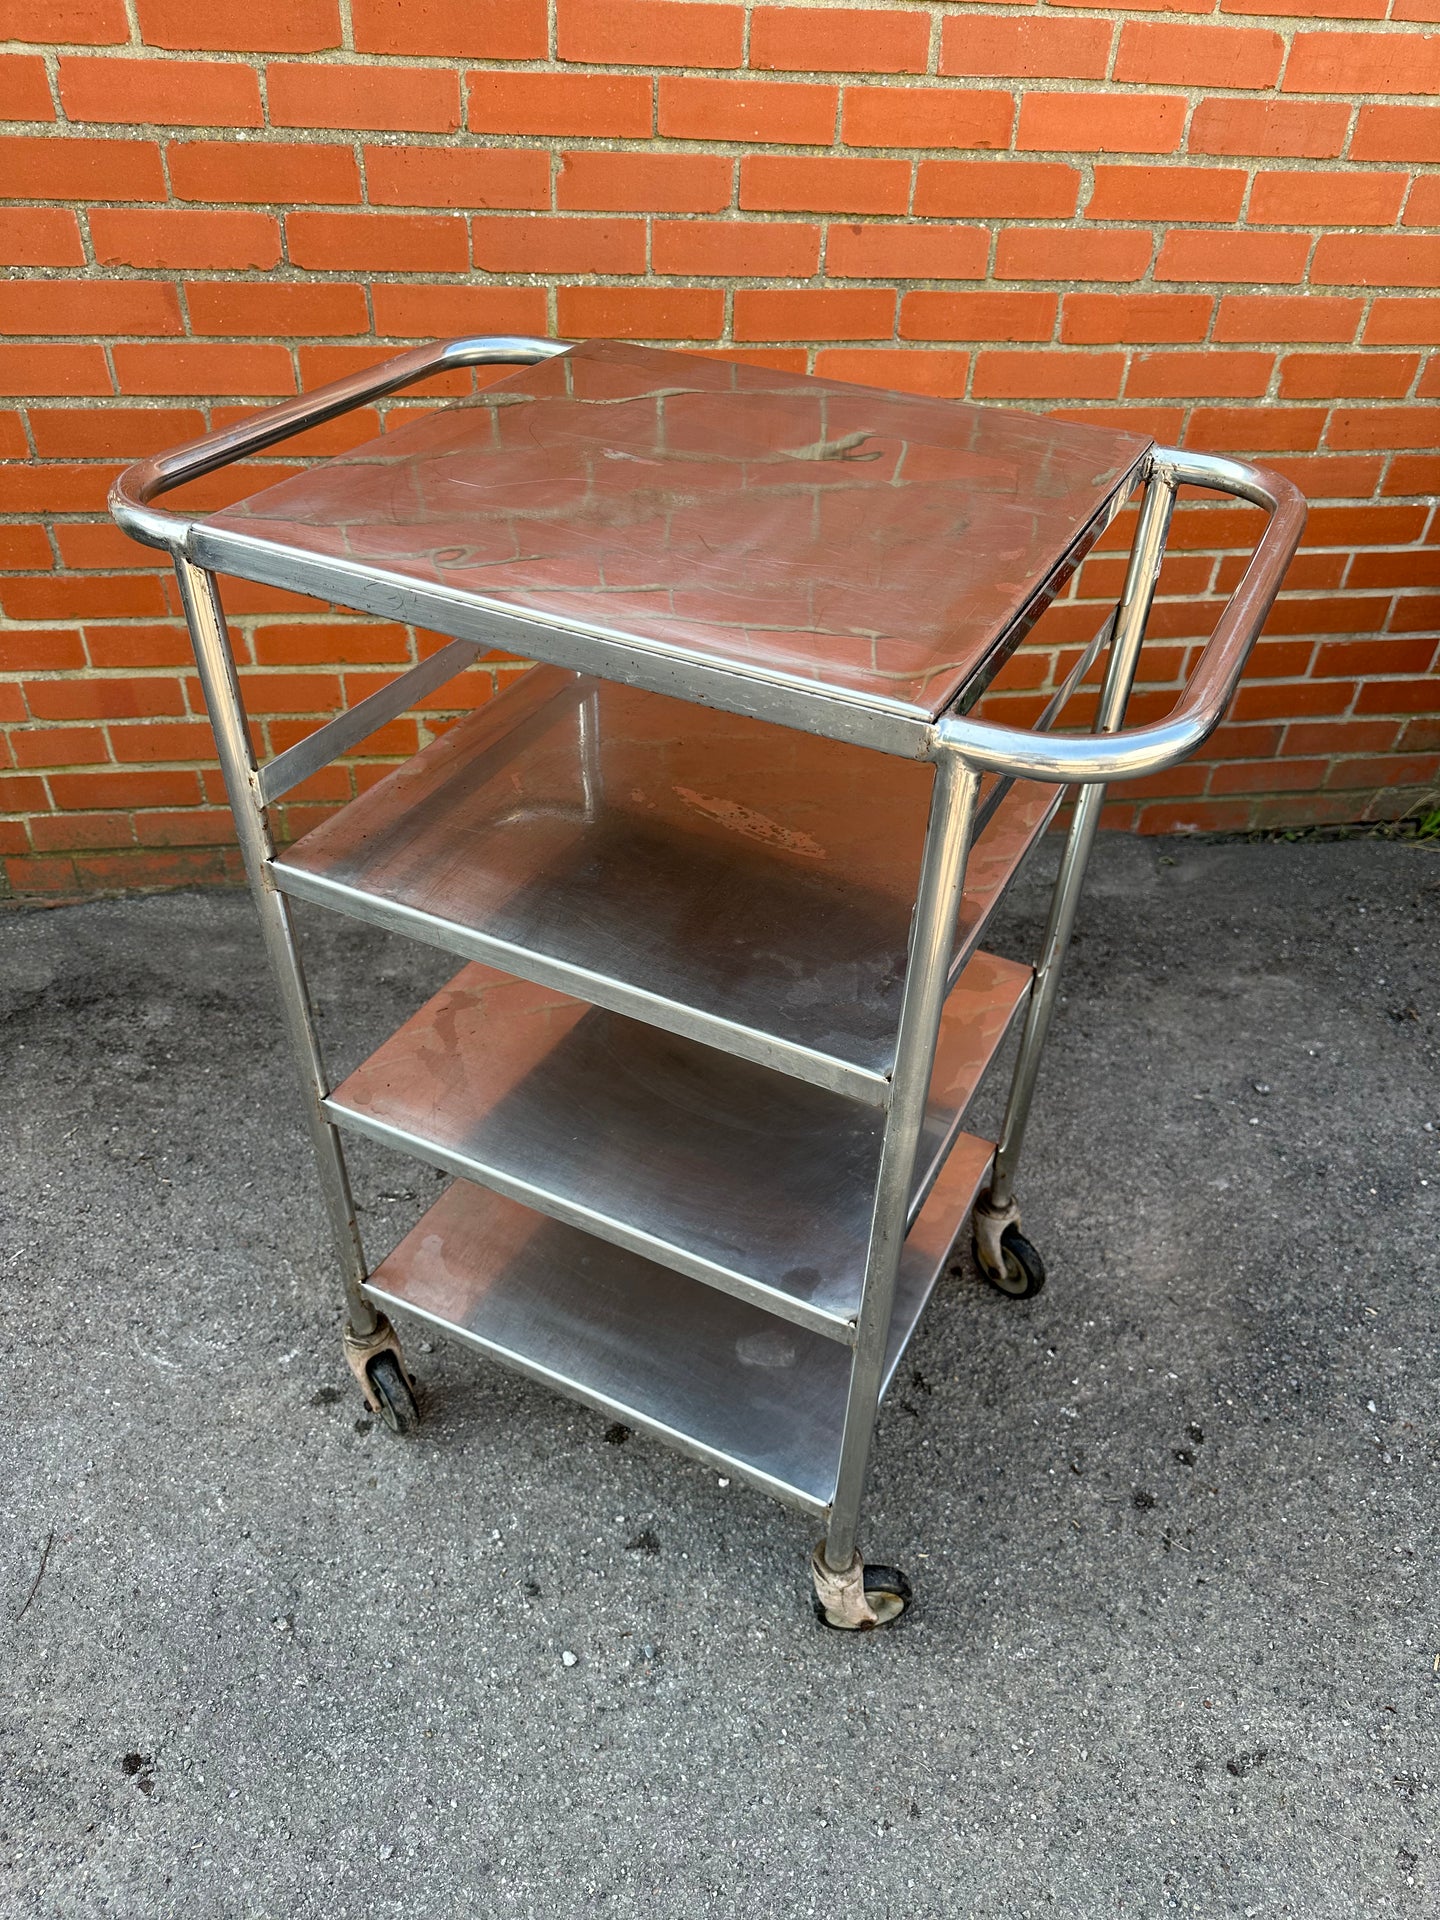 Vintage Stainless Steel Medical/Kitchen Trolley